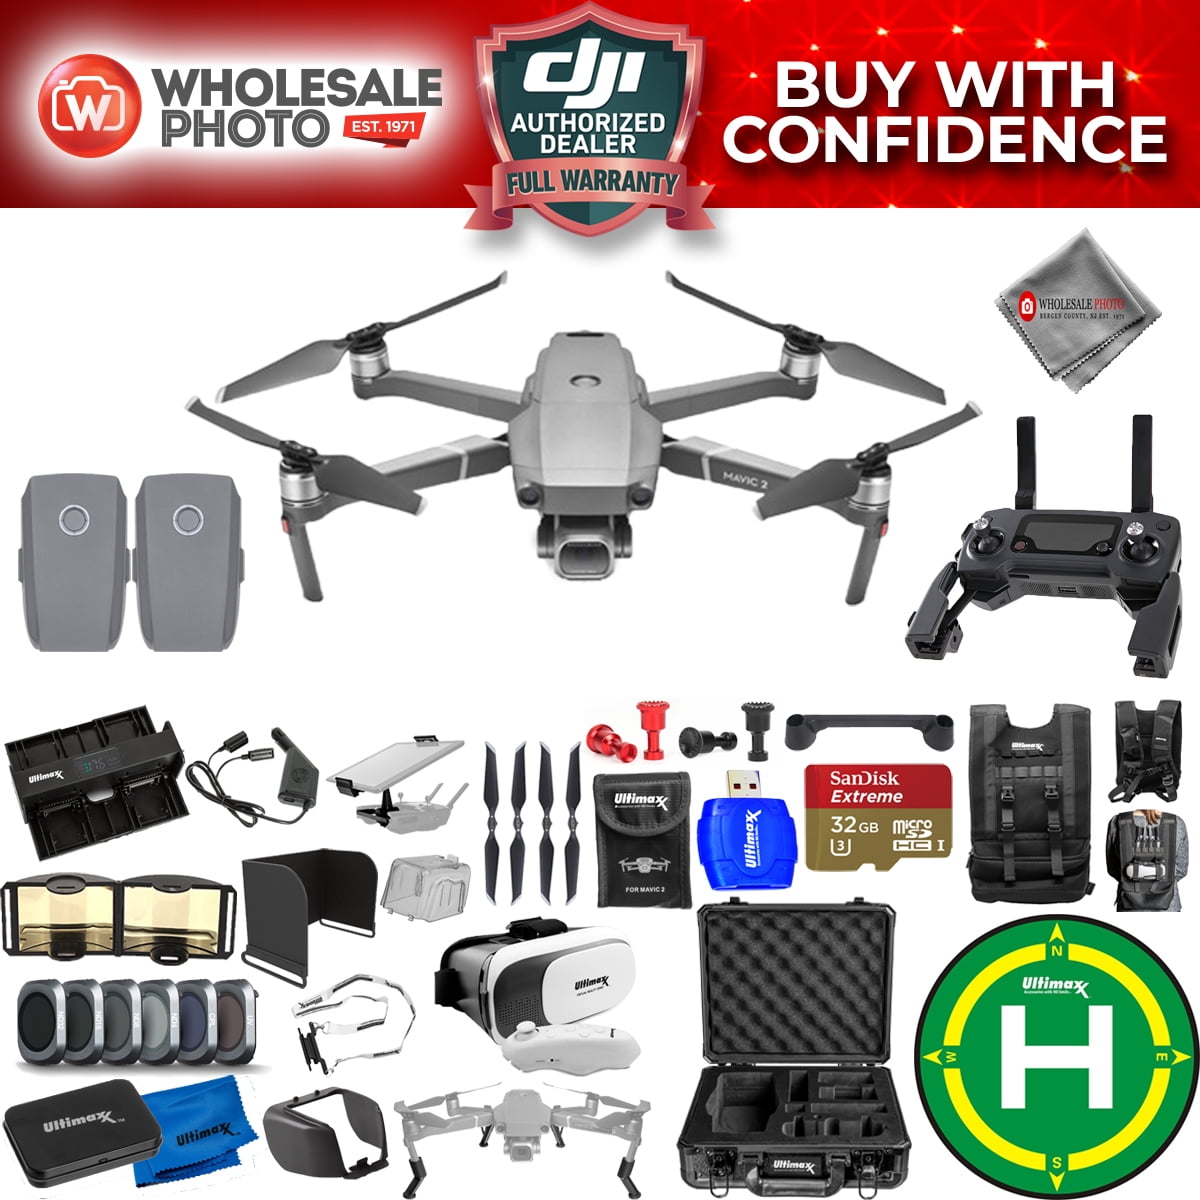 Filter Kit Total Much More Charging Hub 32GB Micro SD PRO Accessory Bundle with Hardshell Backpack DJI Mavic 2 Zoom 1 Battery VR Goggles Landing Pad Drone Vest 